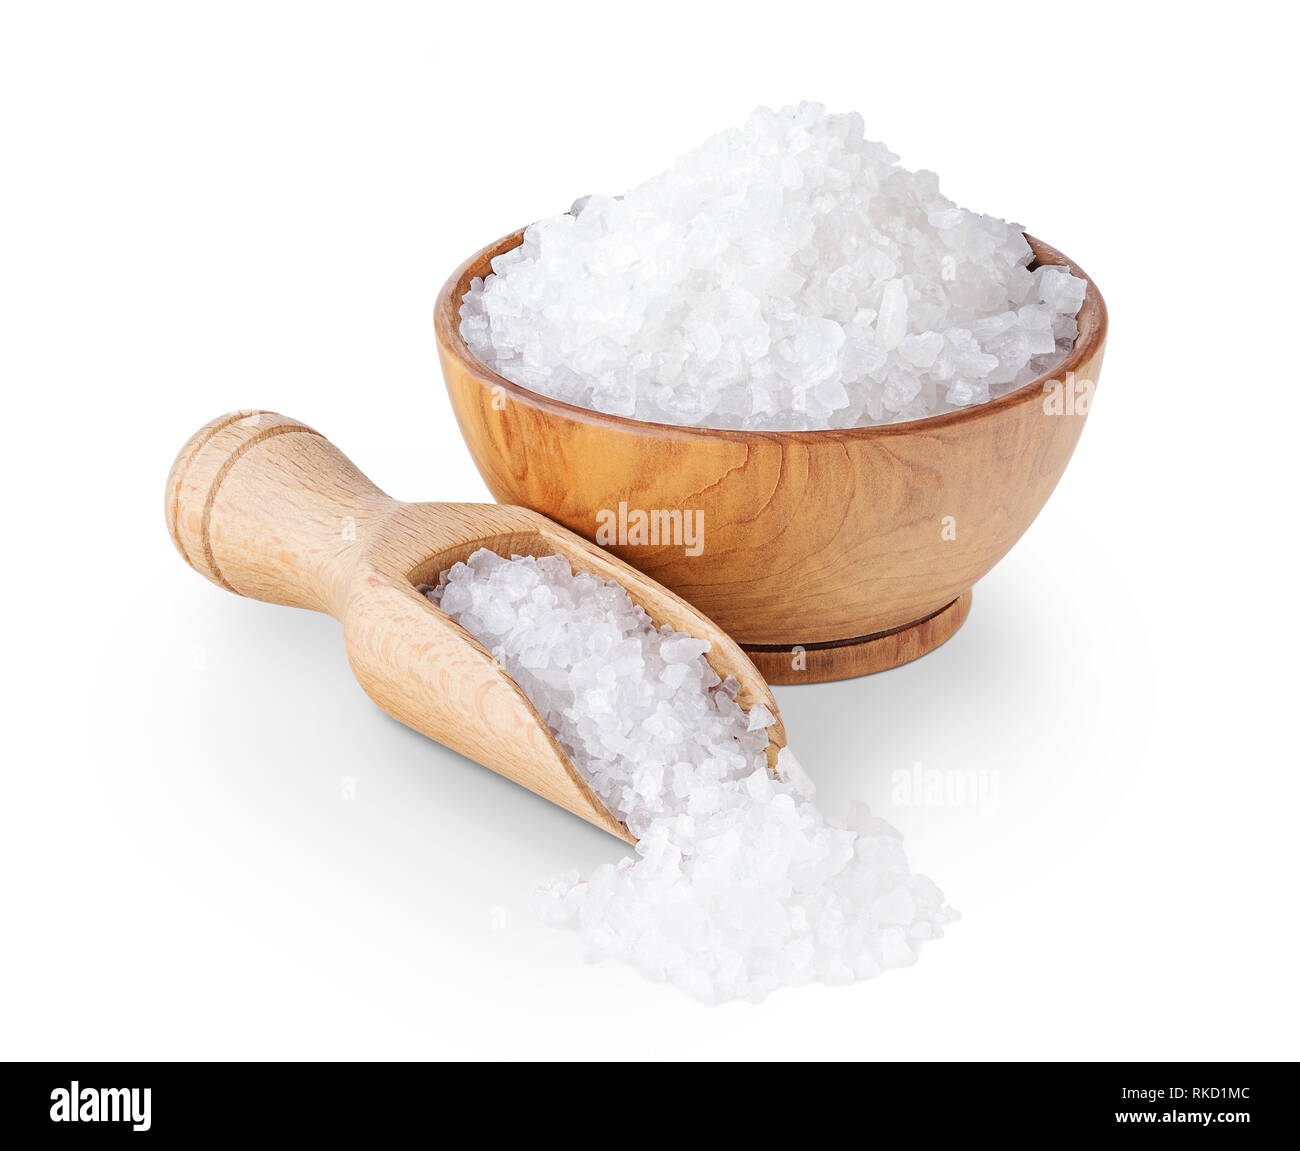 Sea salt crystals in a wooden bowl isolated on white Stock Photo